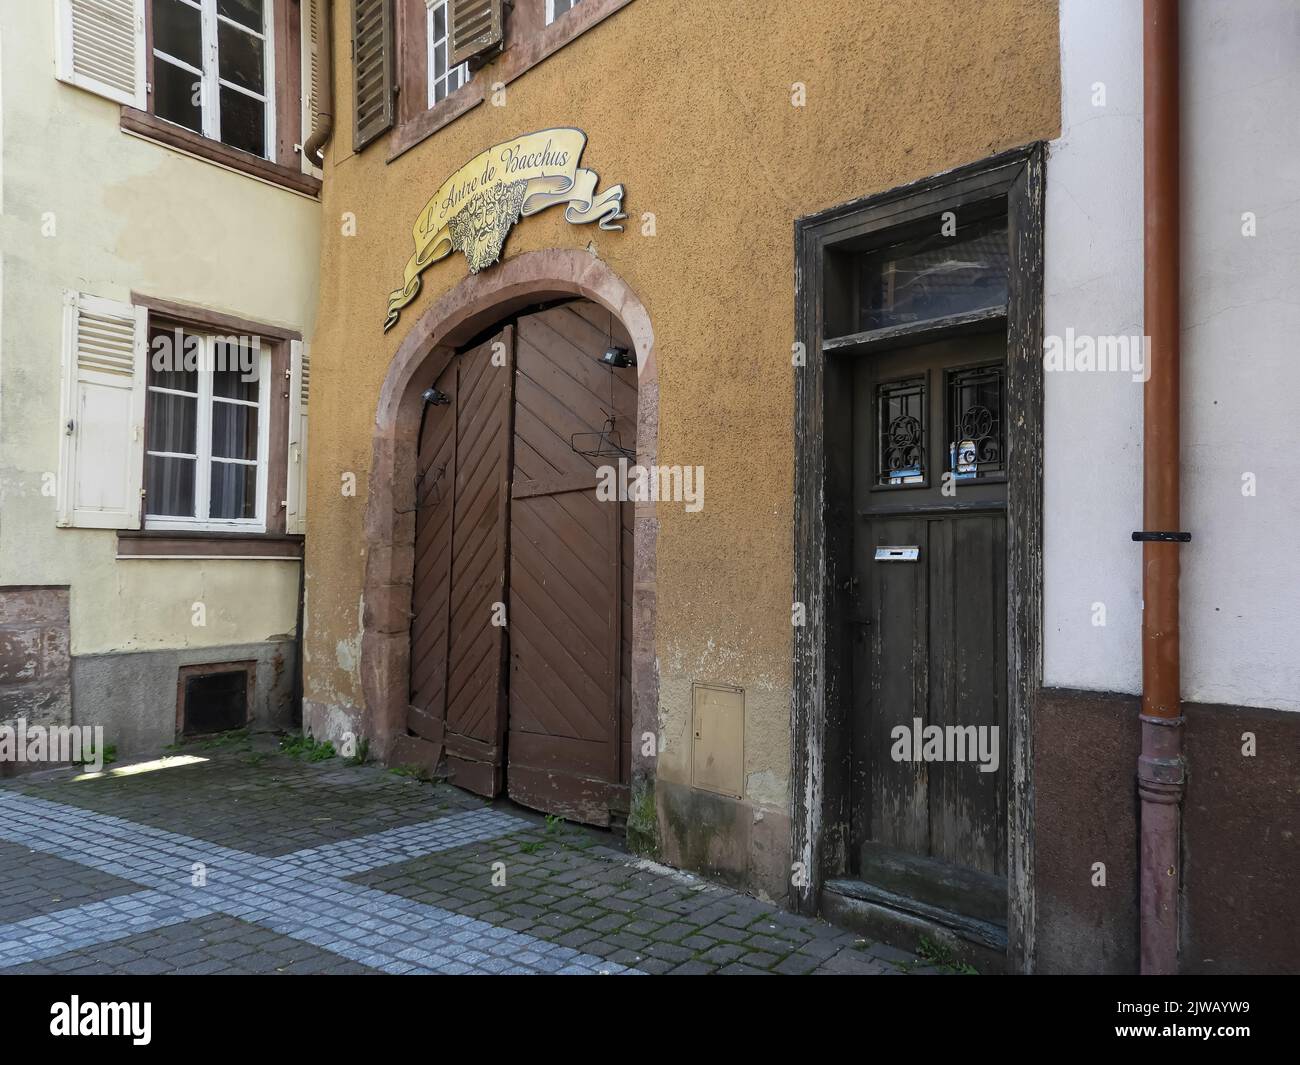 Wine cellar doorway in the Alsace region of France with a sign above the entrance Stock Photo